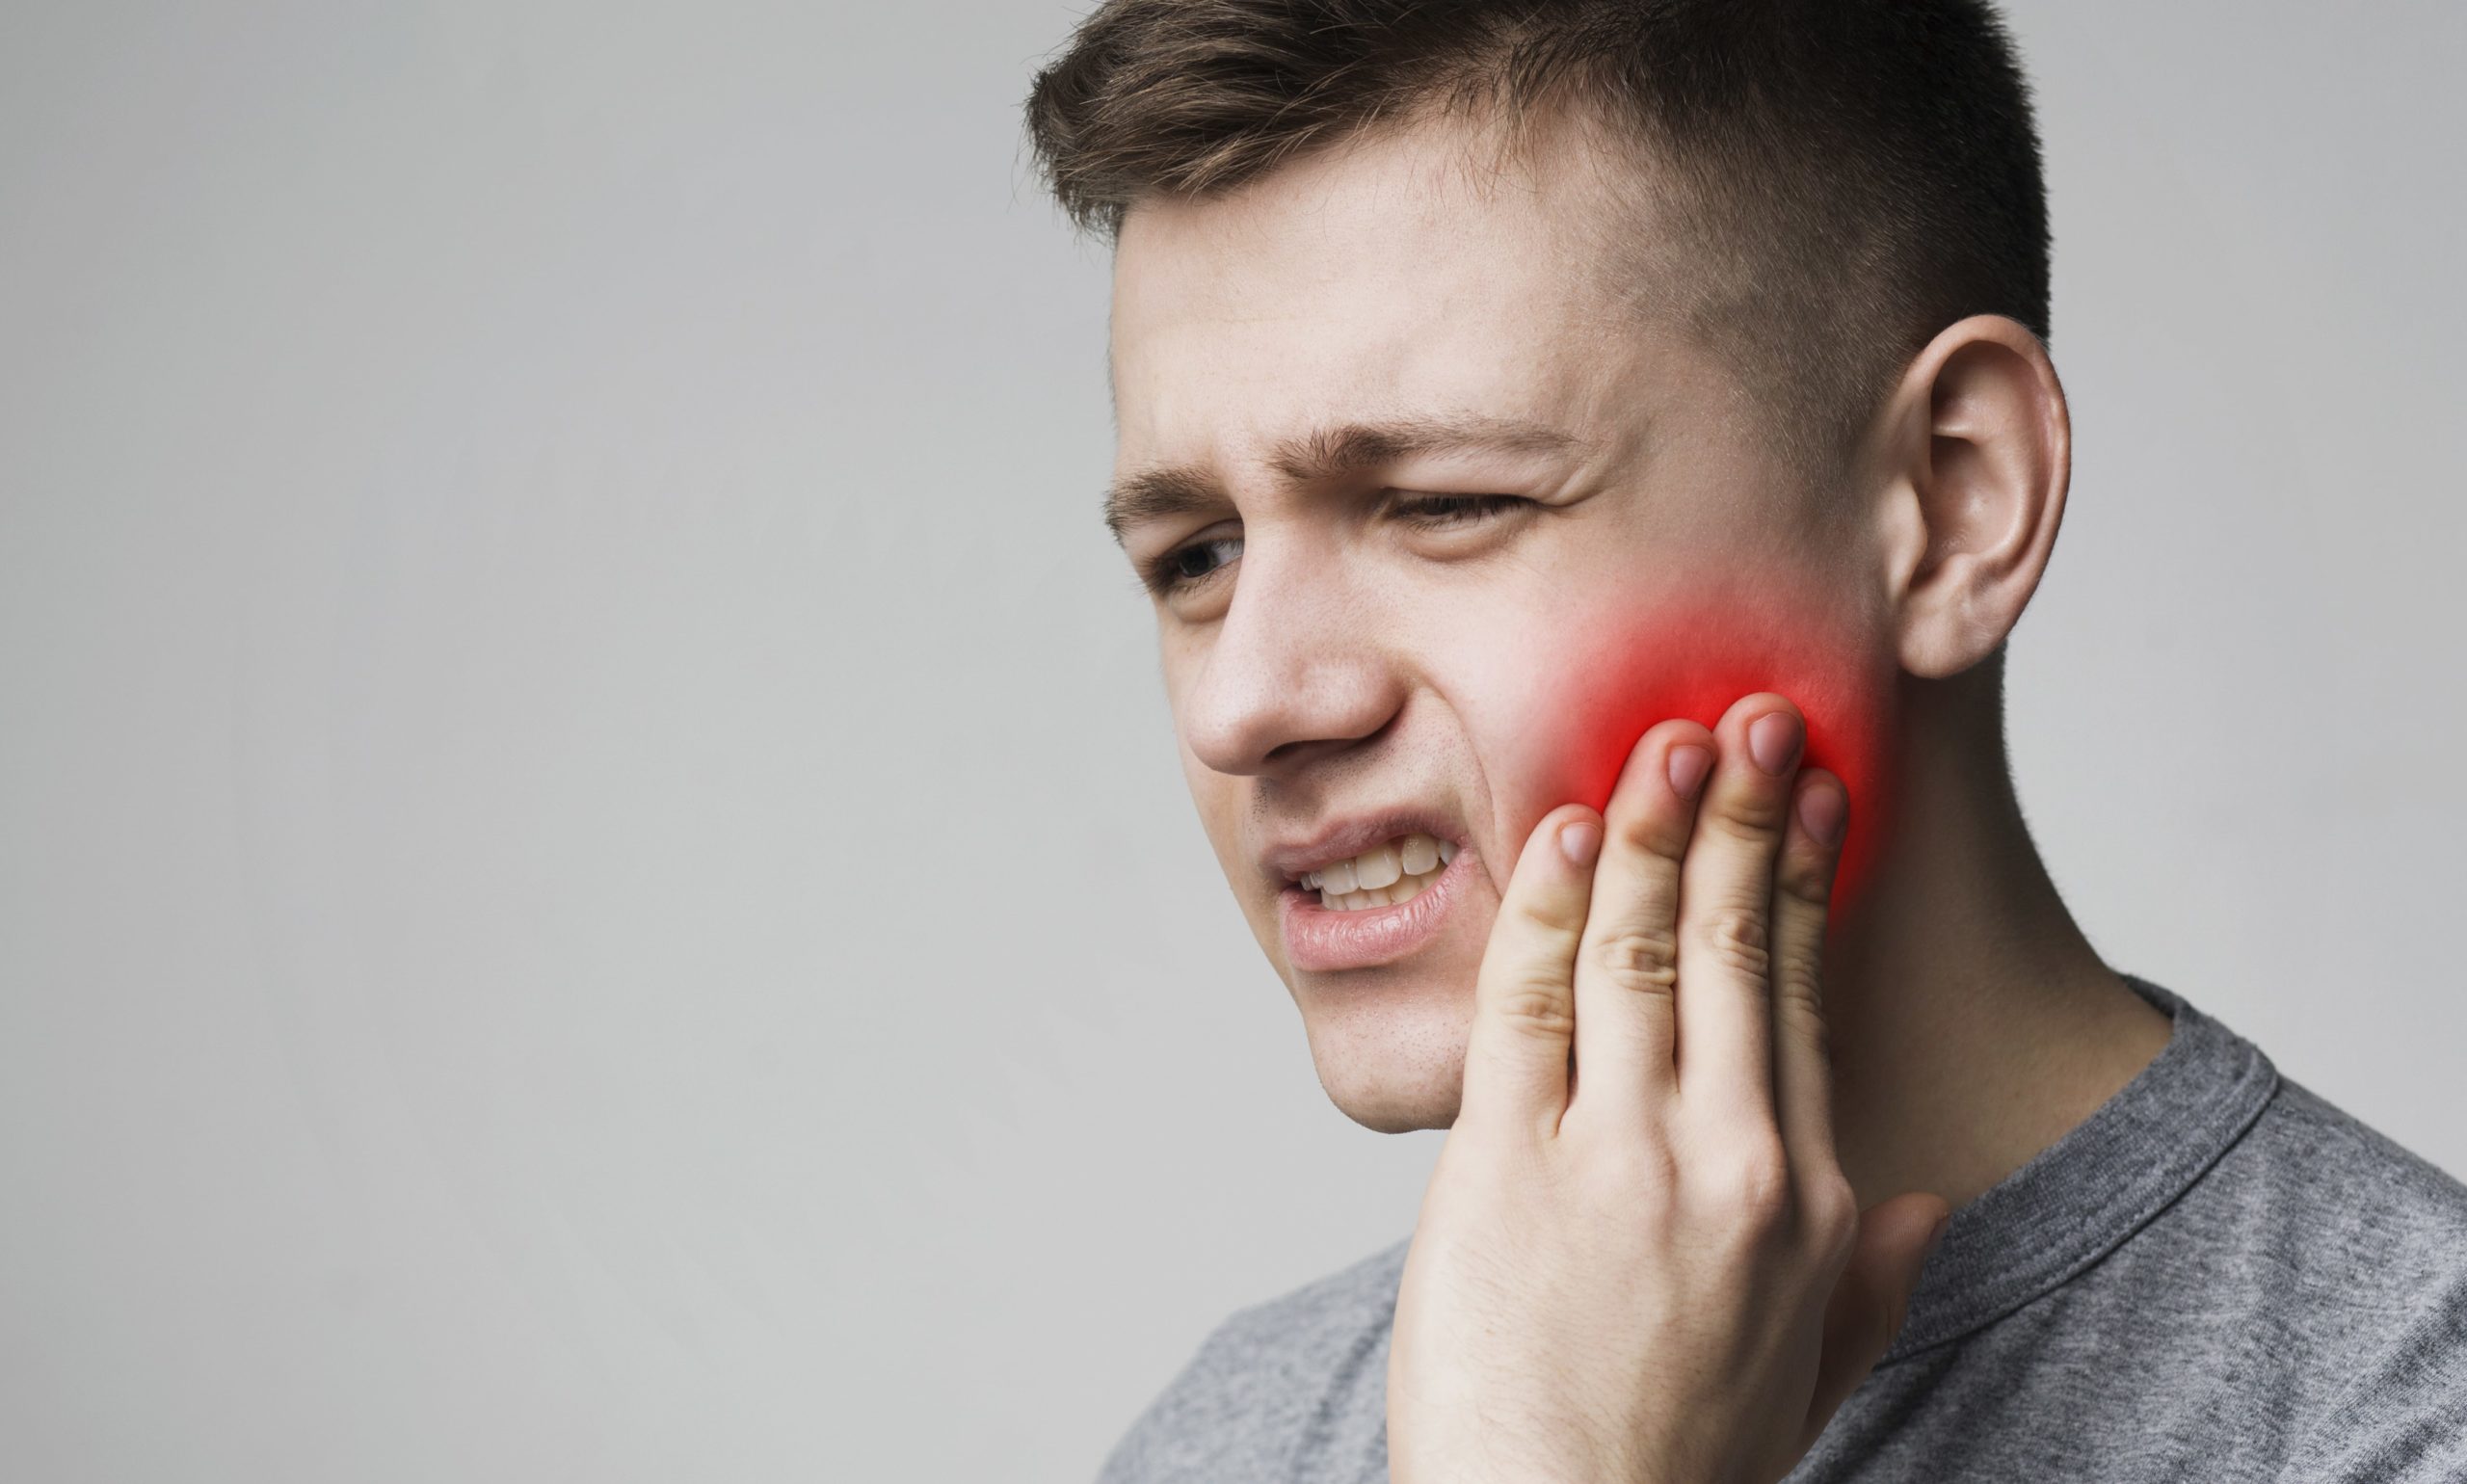 How Can I Relieve My Jaw Pain?